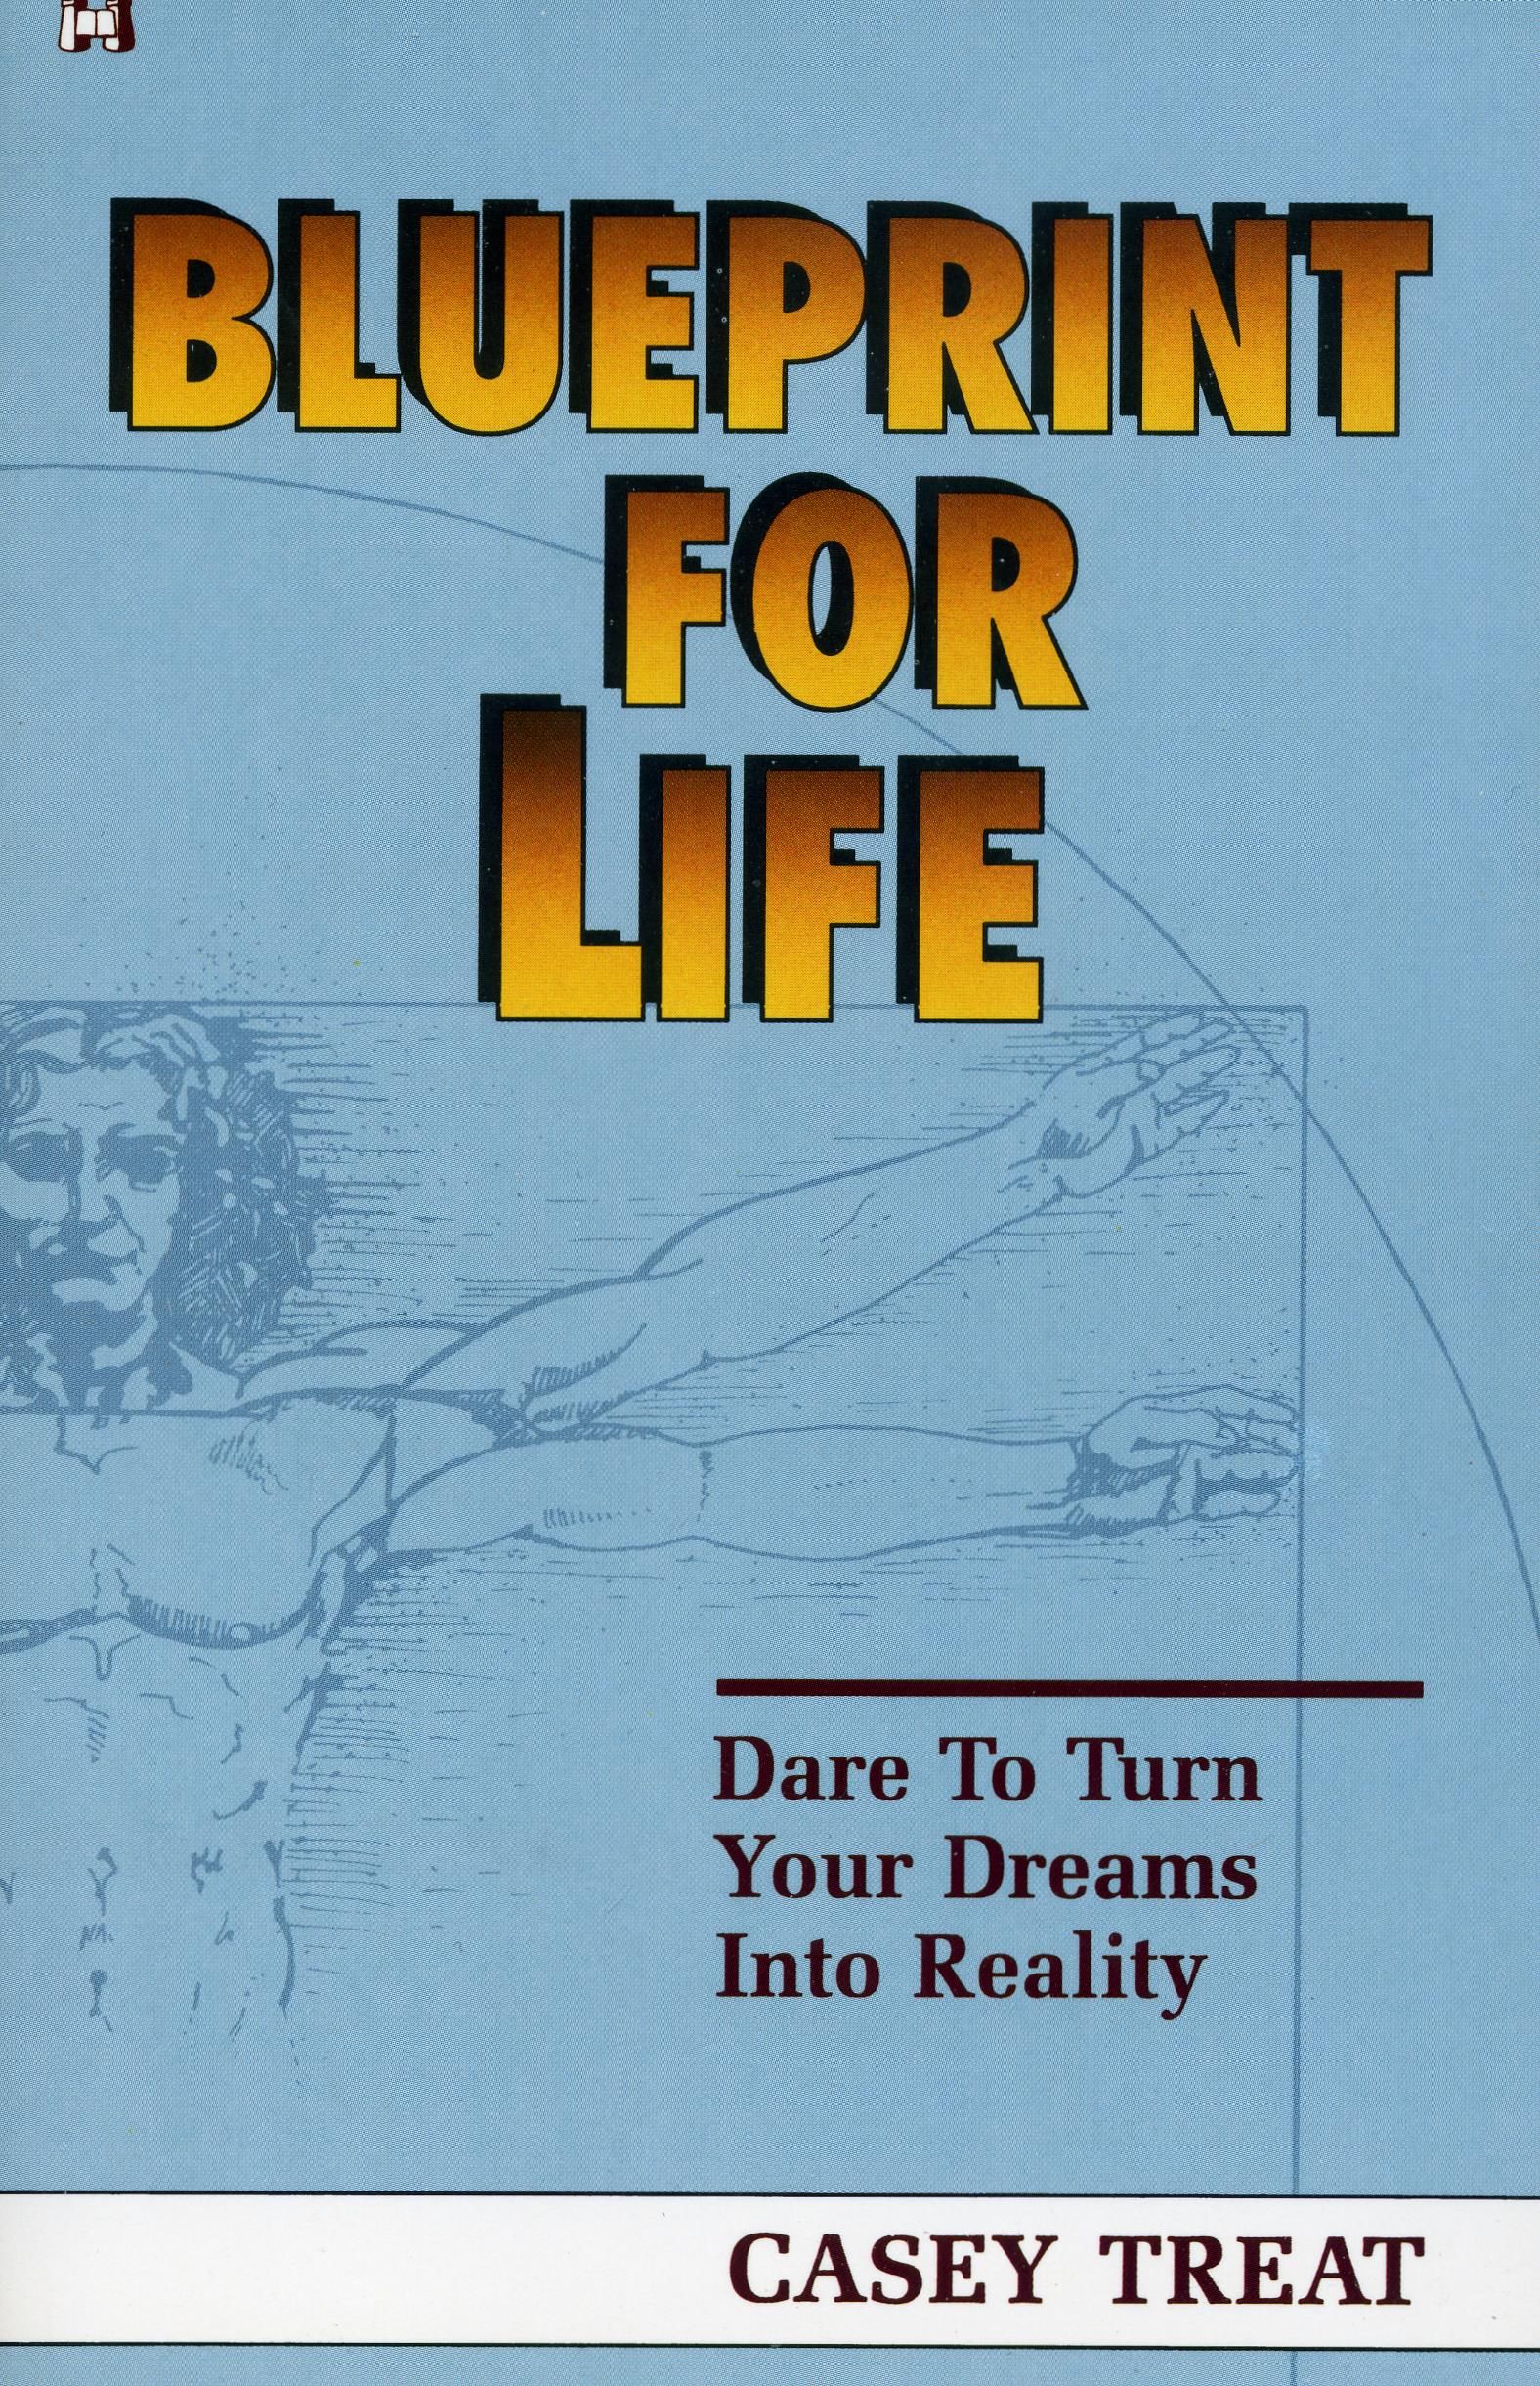 C. Treat: Blueprint for Life - Turn your dreams into Reality